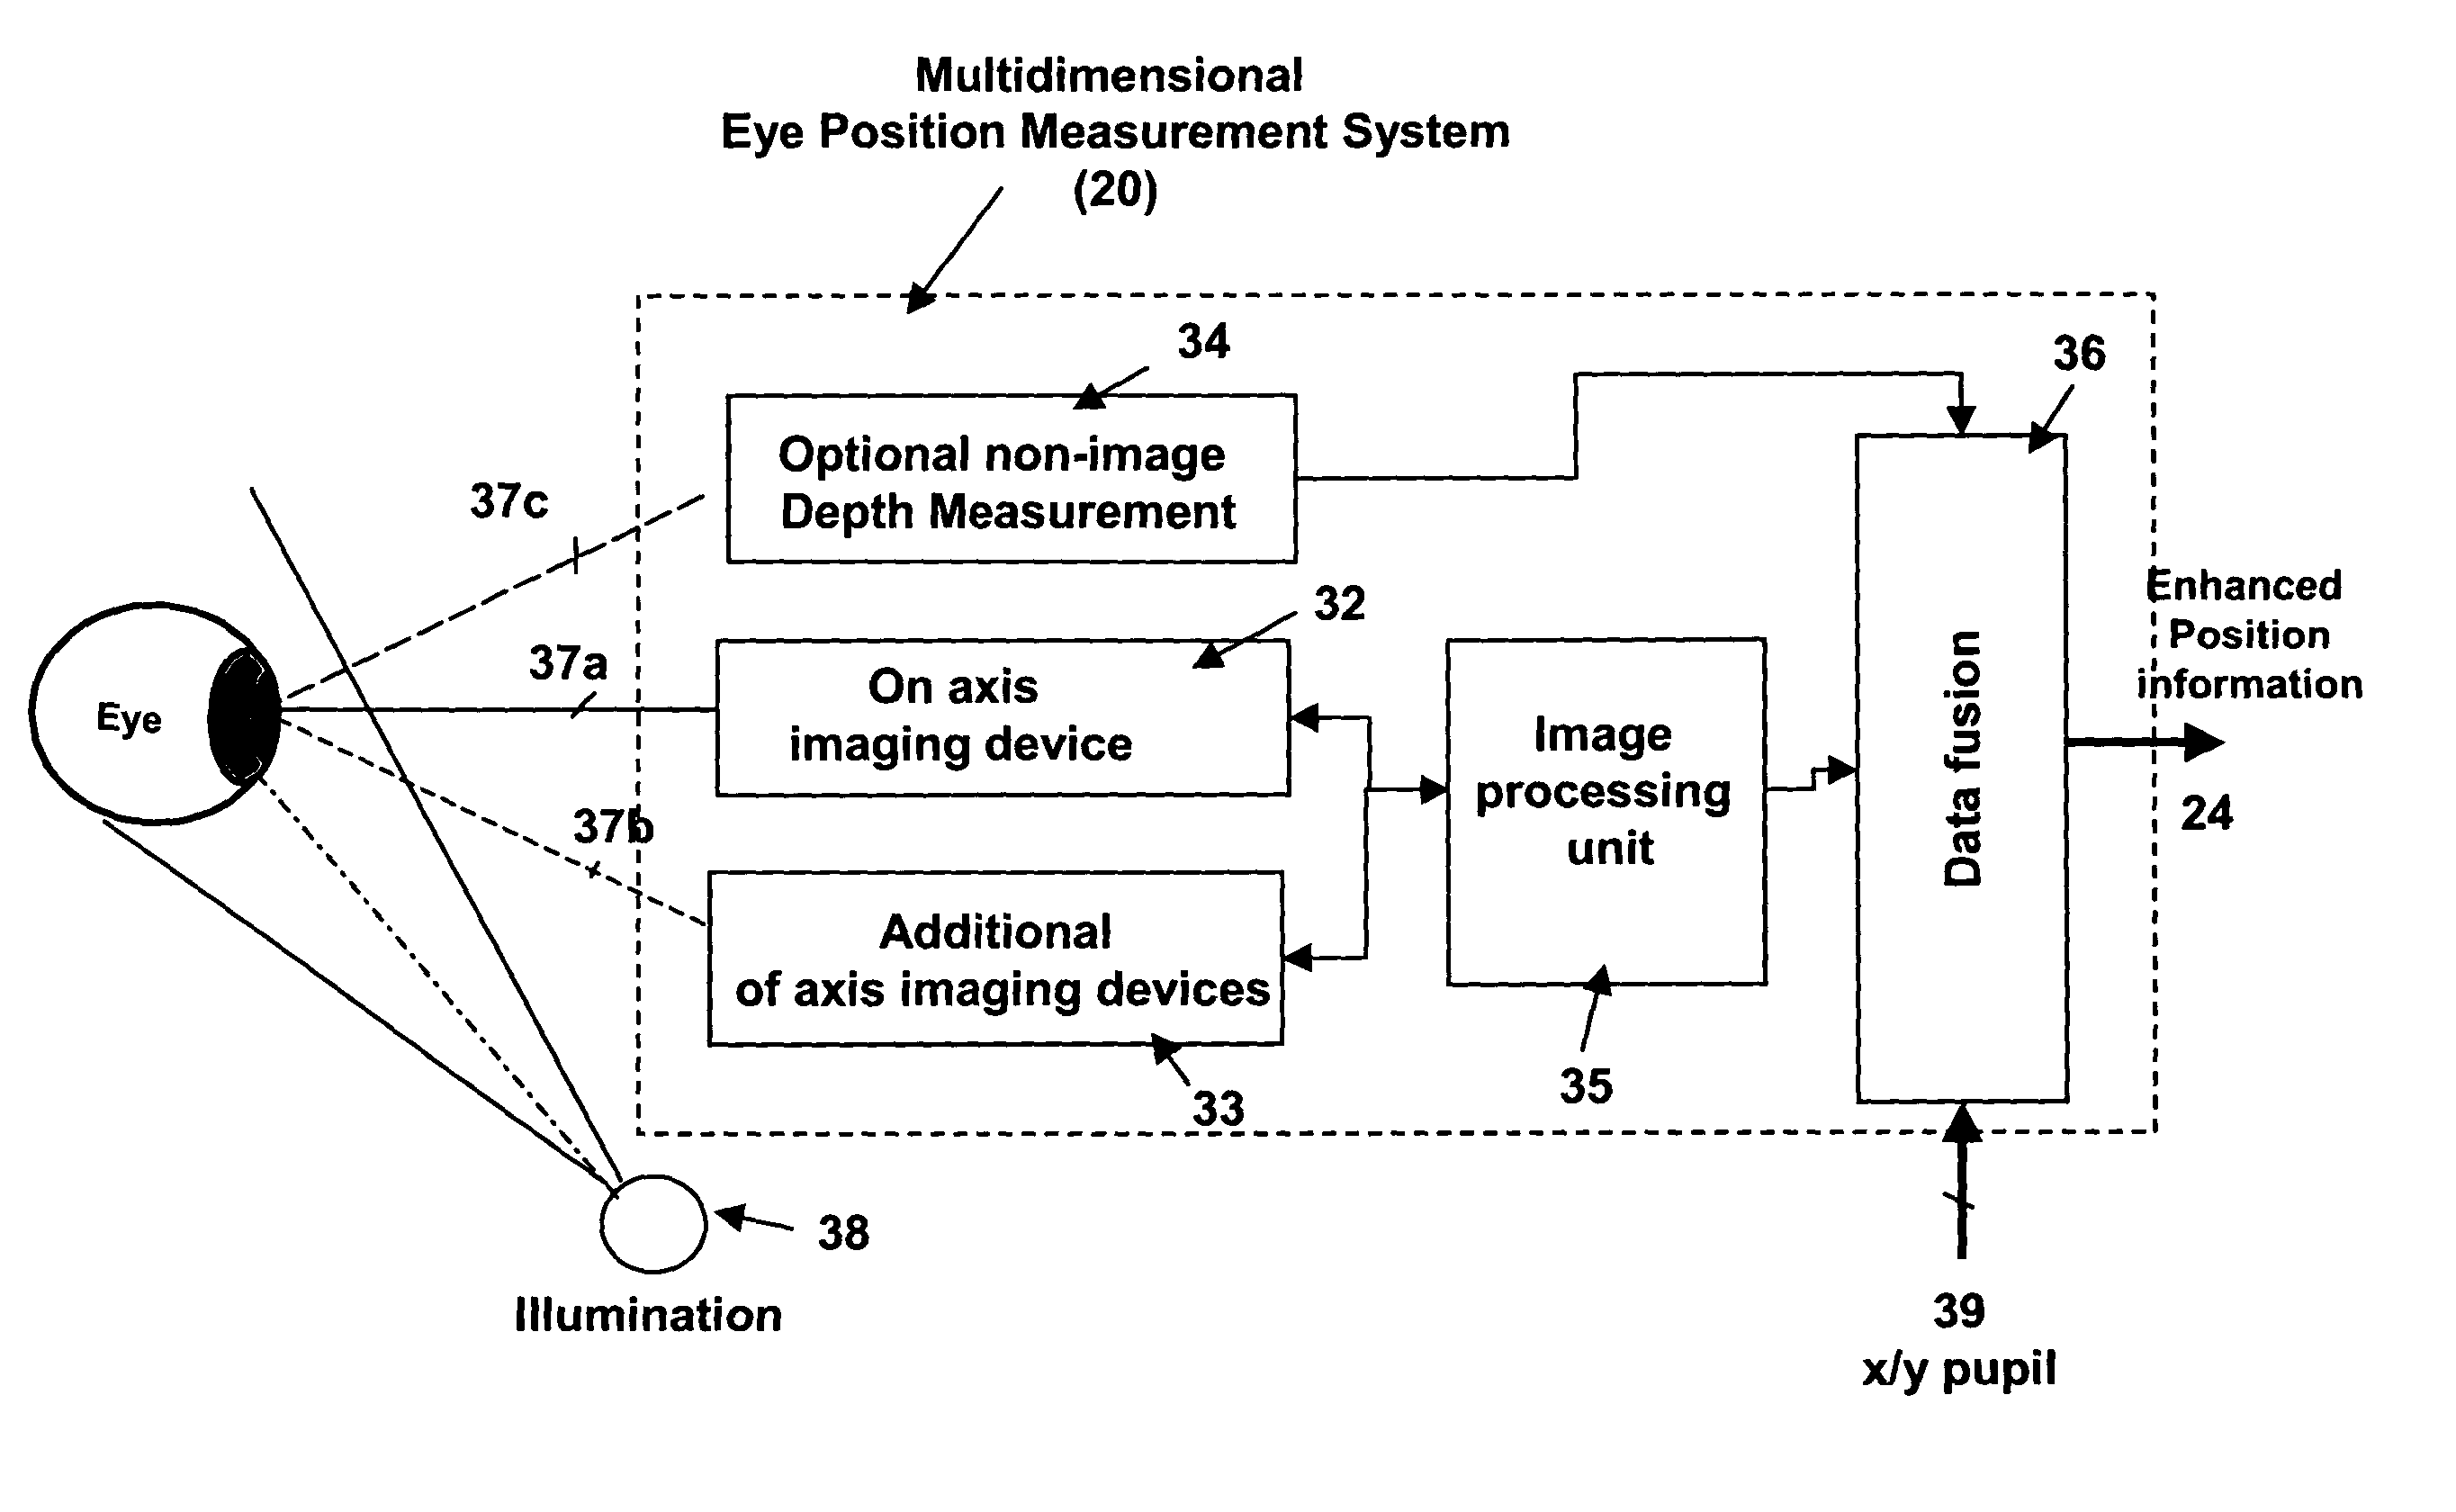 Multidimensional eye tracking and position measurement system for diagnosis and treatment of the eye